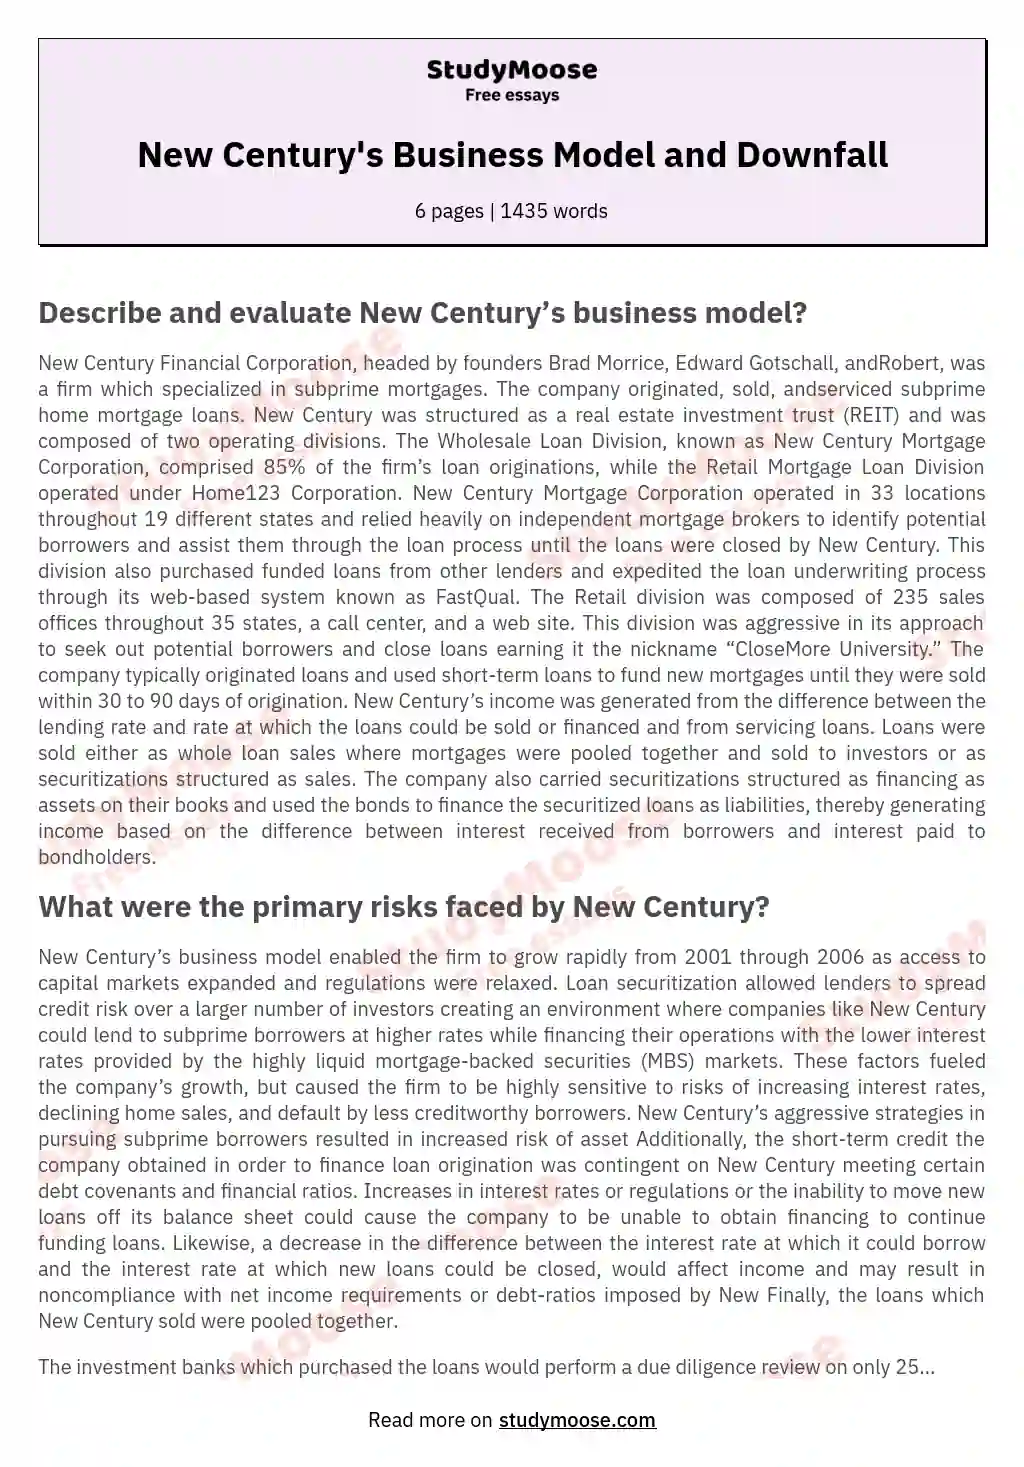 New Century's Business Model and Downfall essay